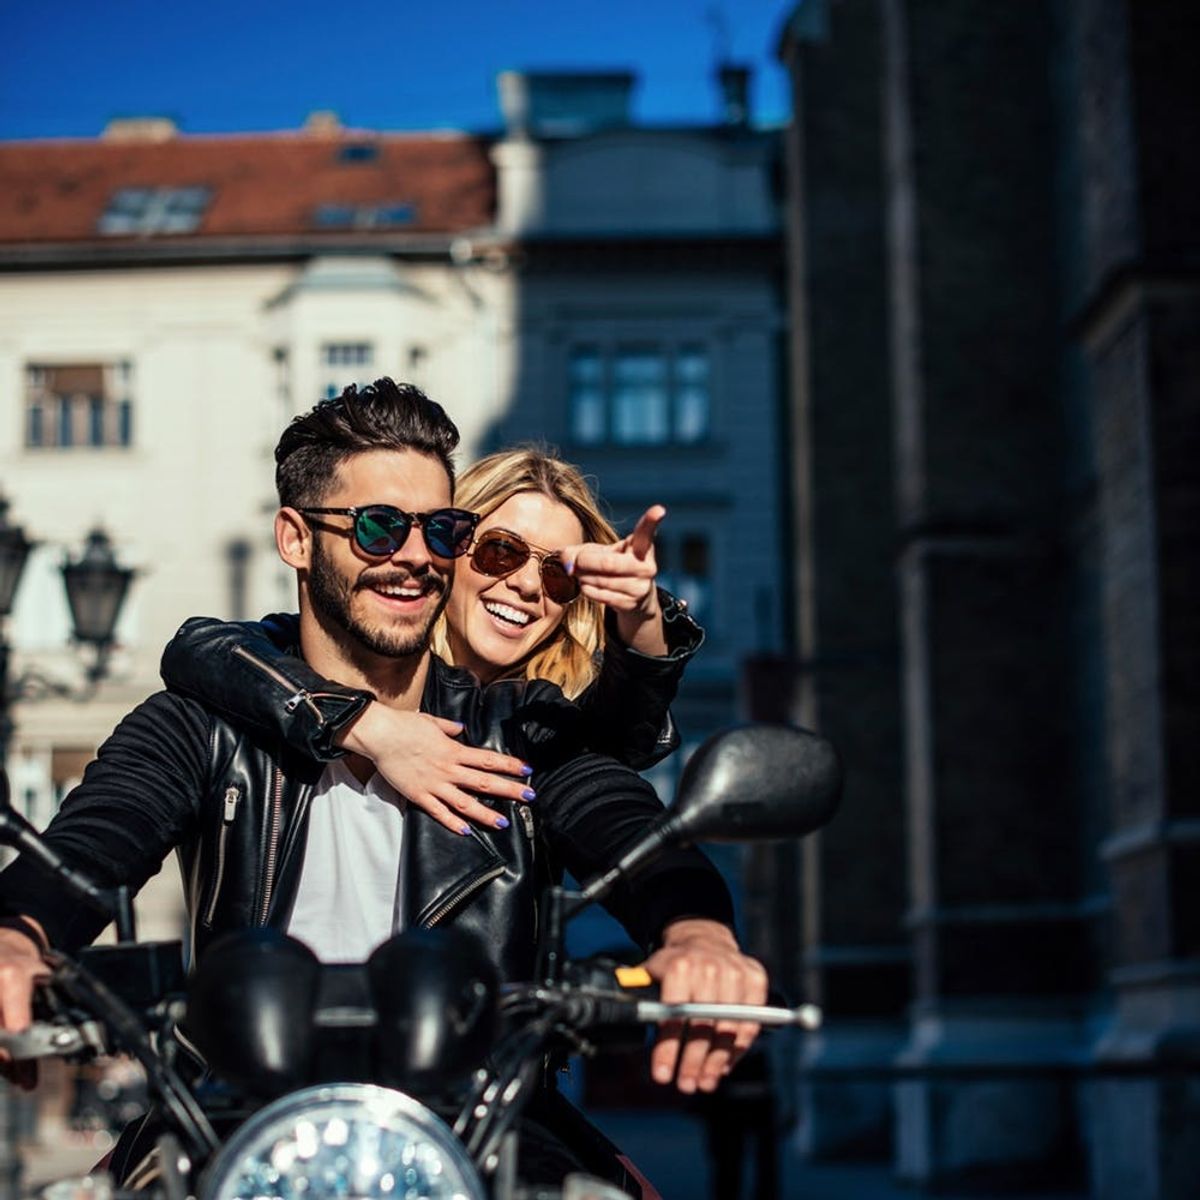 The 10 Best Weekend Trips to Take With Your New Boo